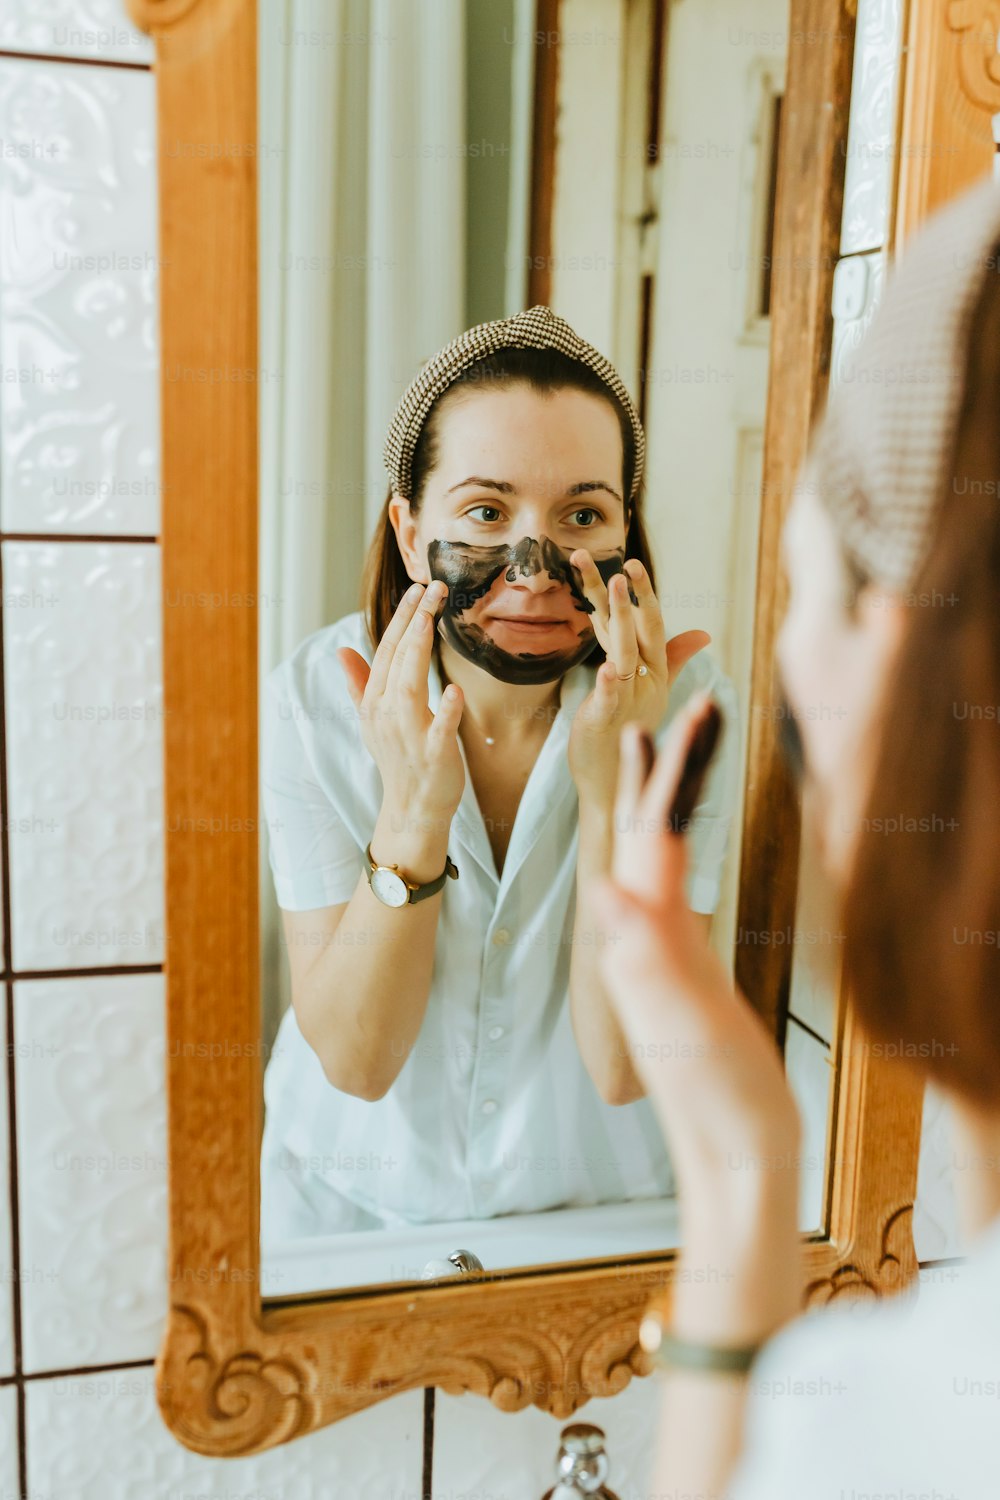 a woman is shaving her face in front of a mirror